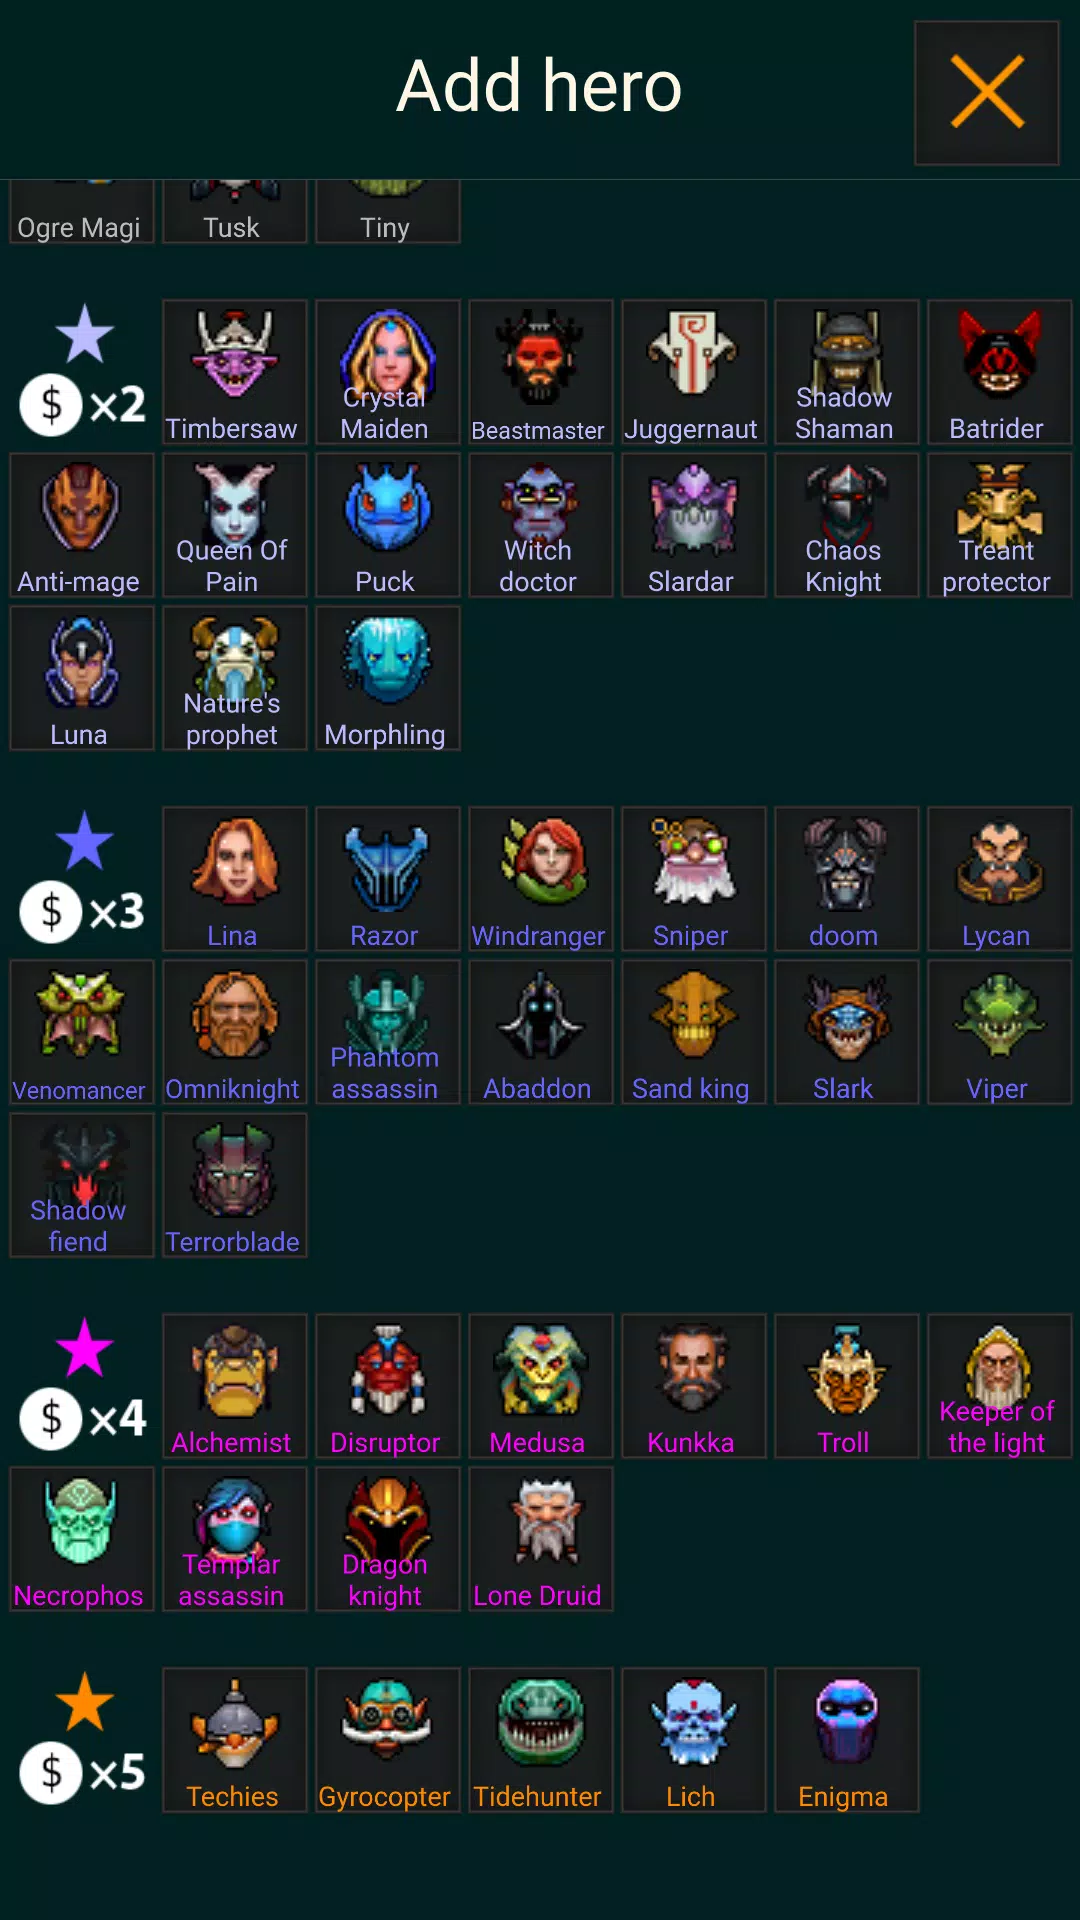 Dota2 Auto Chess Wiki Apk Download for Android- Latest version 1.0